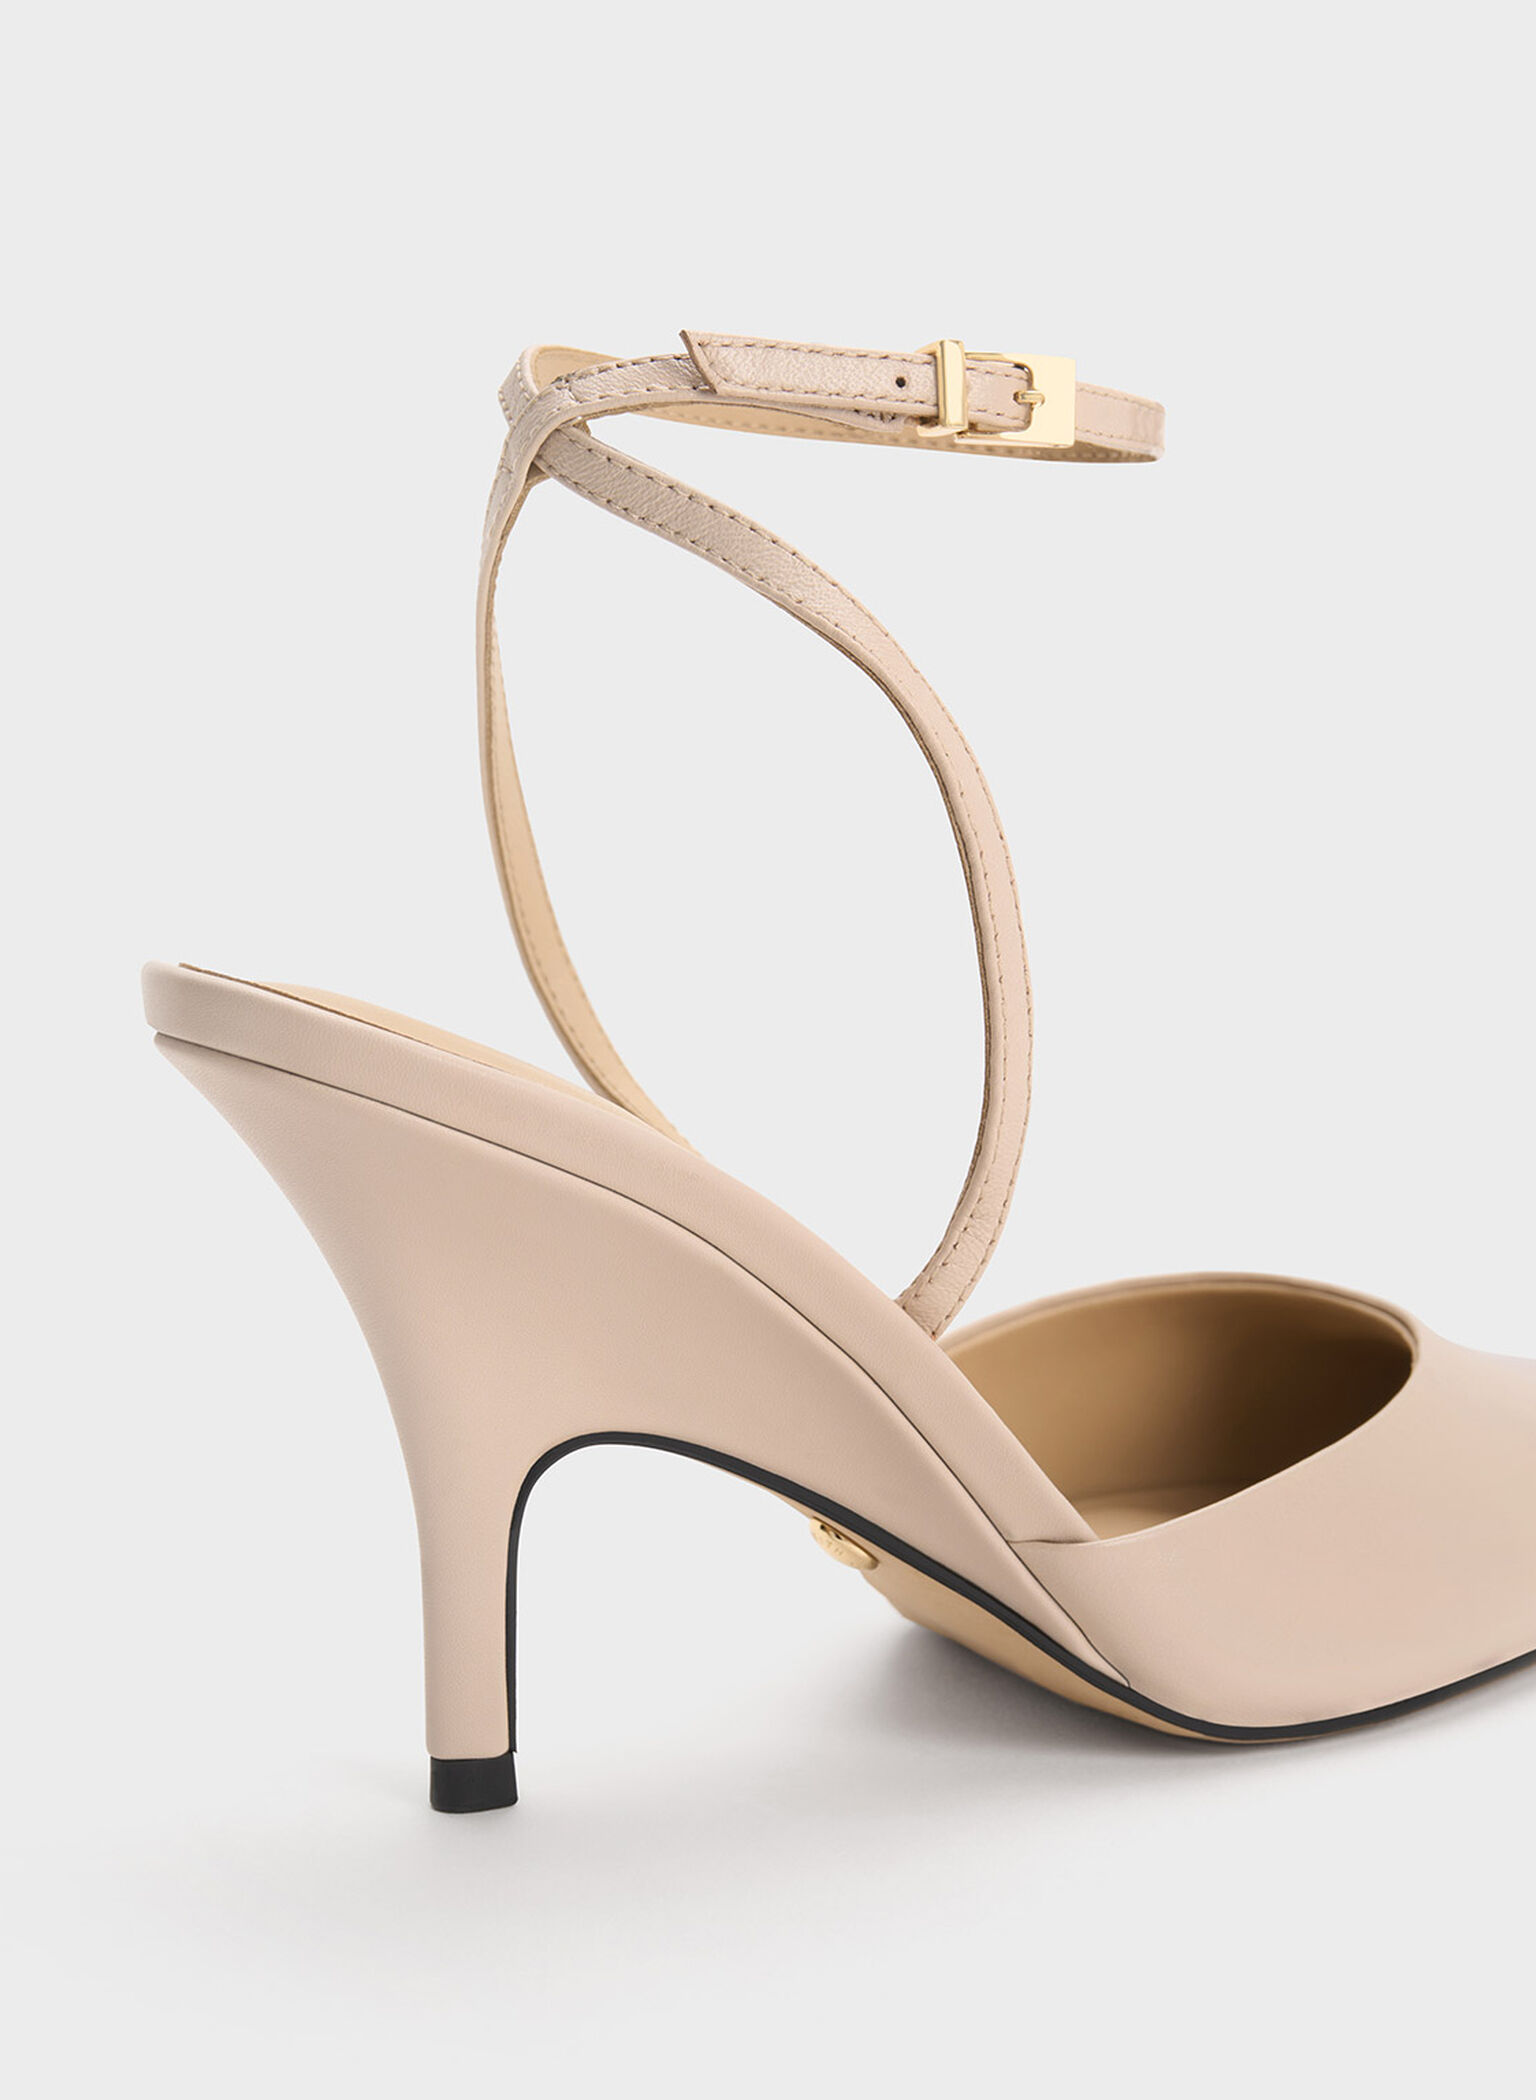 Leather Ankle Strap Pumps, Nude, hi-res